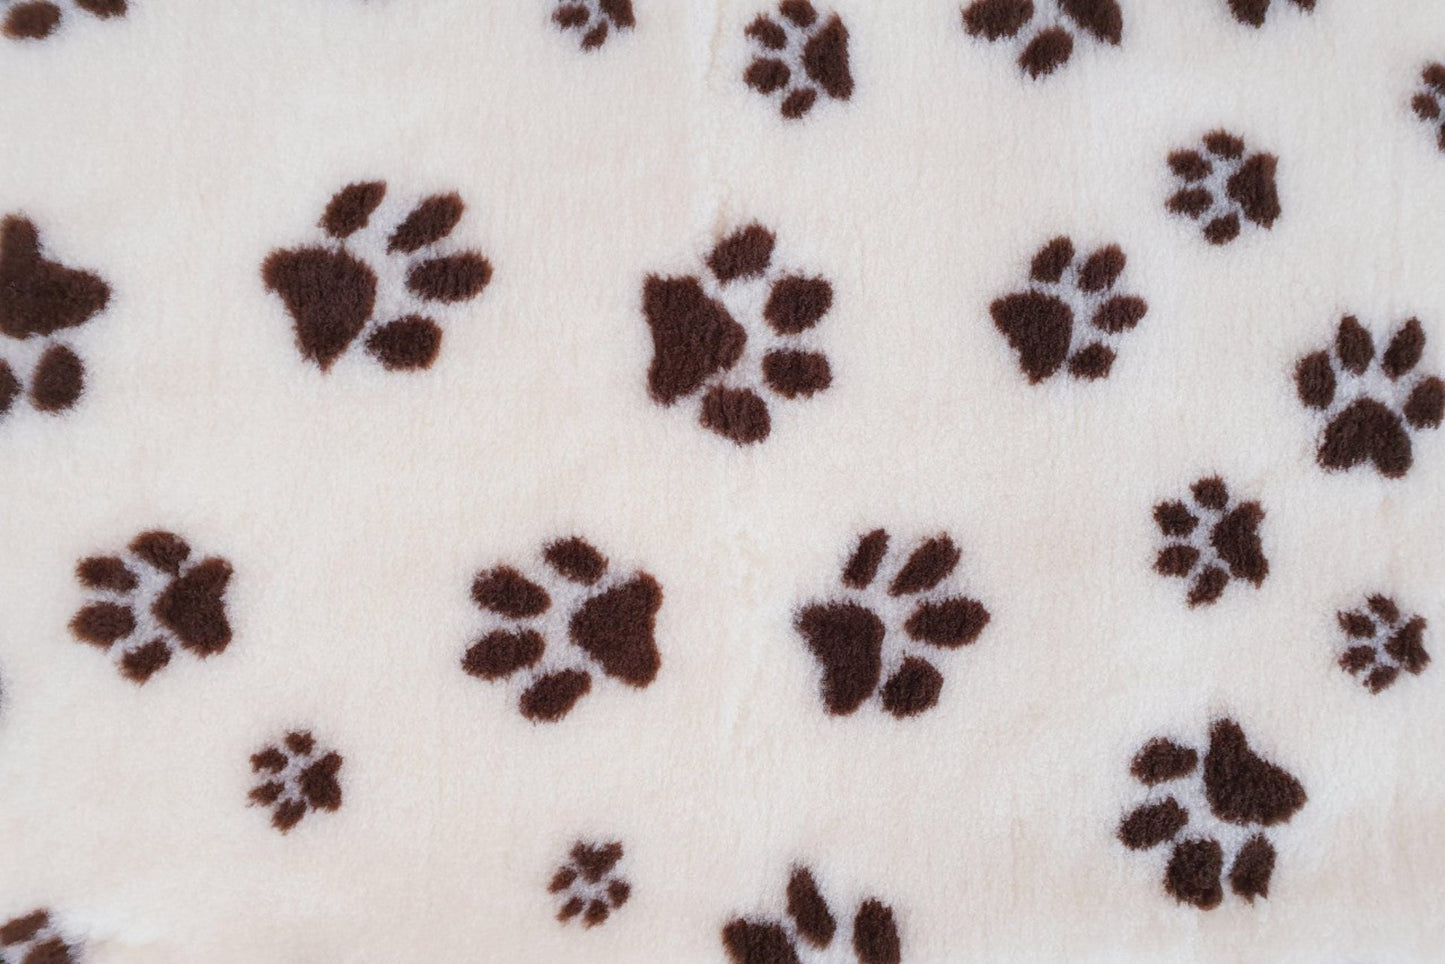 Vet Bed - Rubber Backed - Cream with Chocolate Designer Paws